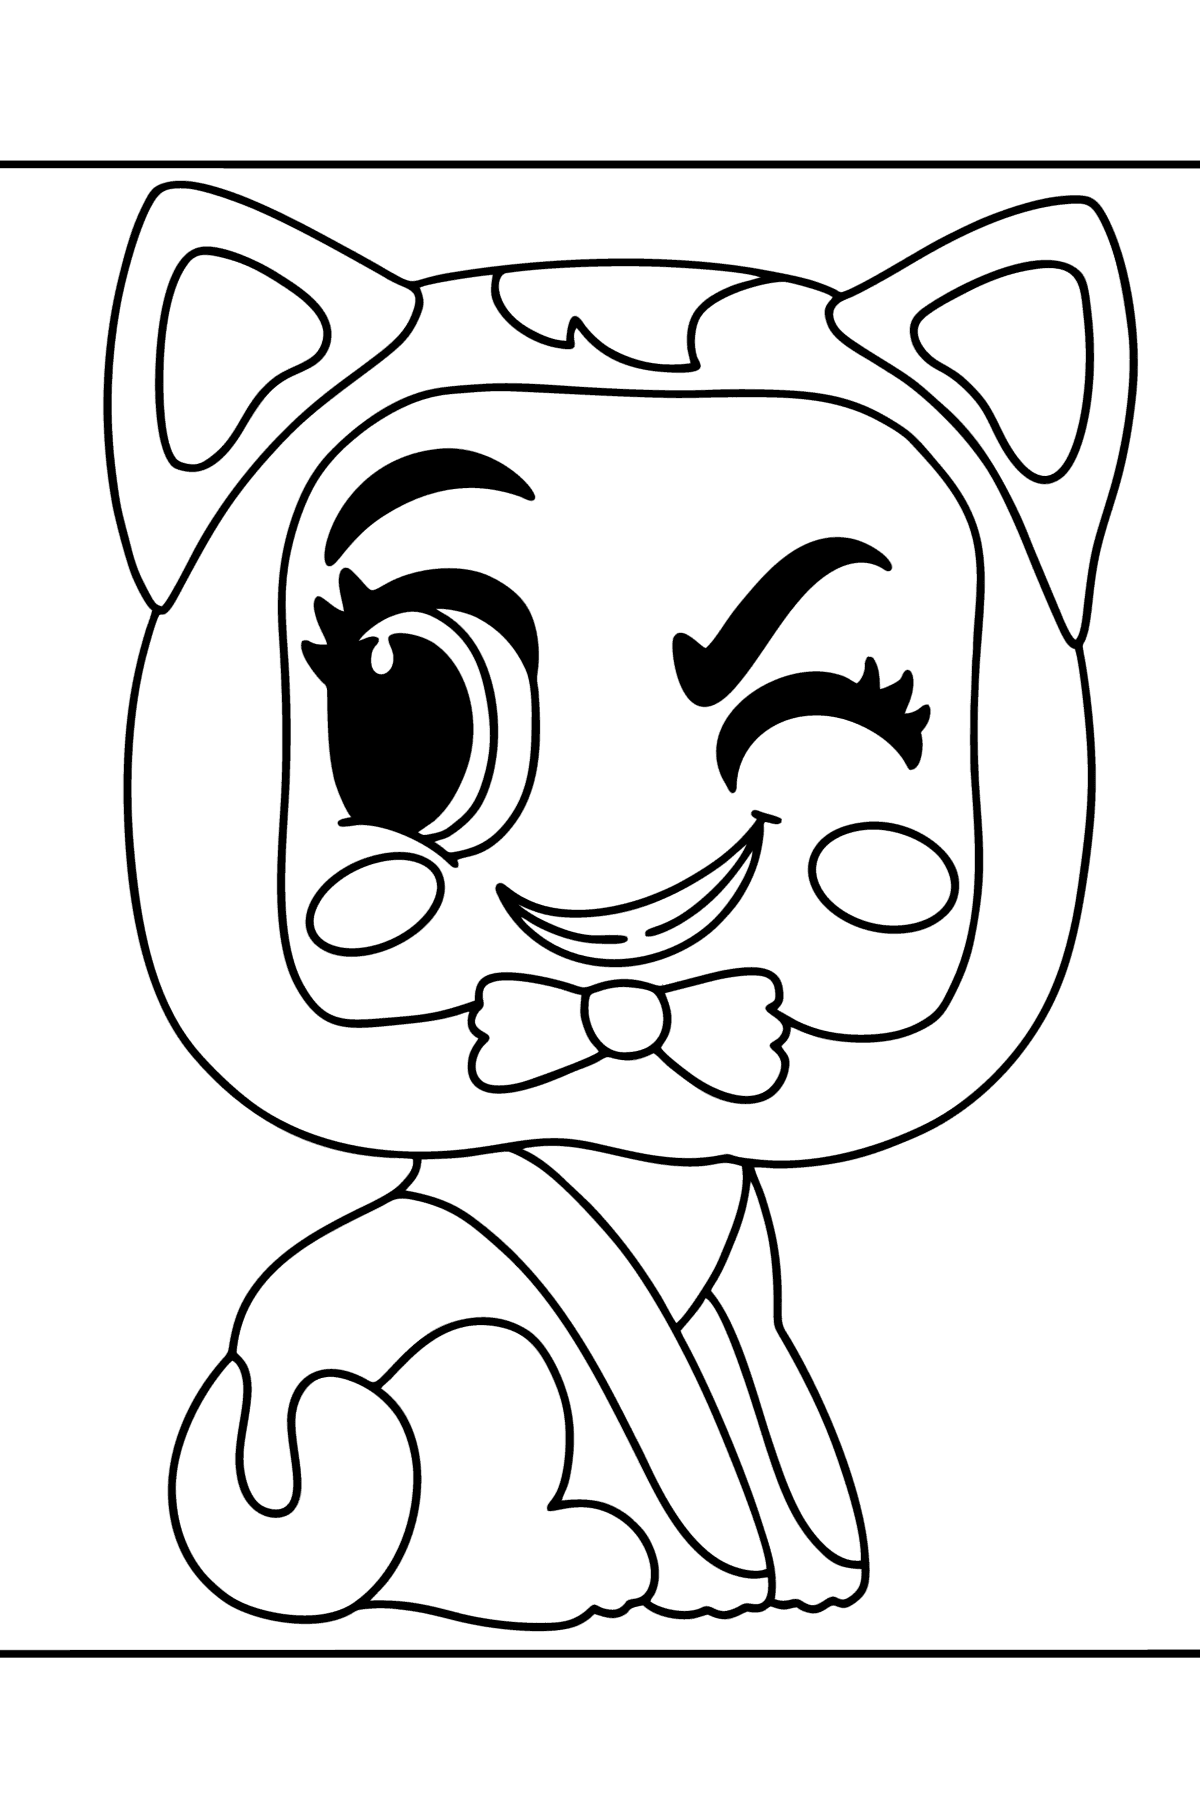 Coloring page MojiPops Snuggles - Coloring Pages for Kids